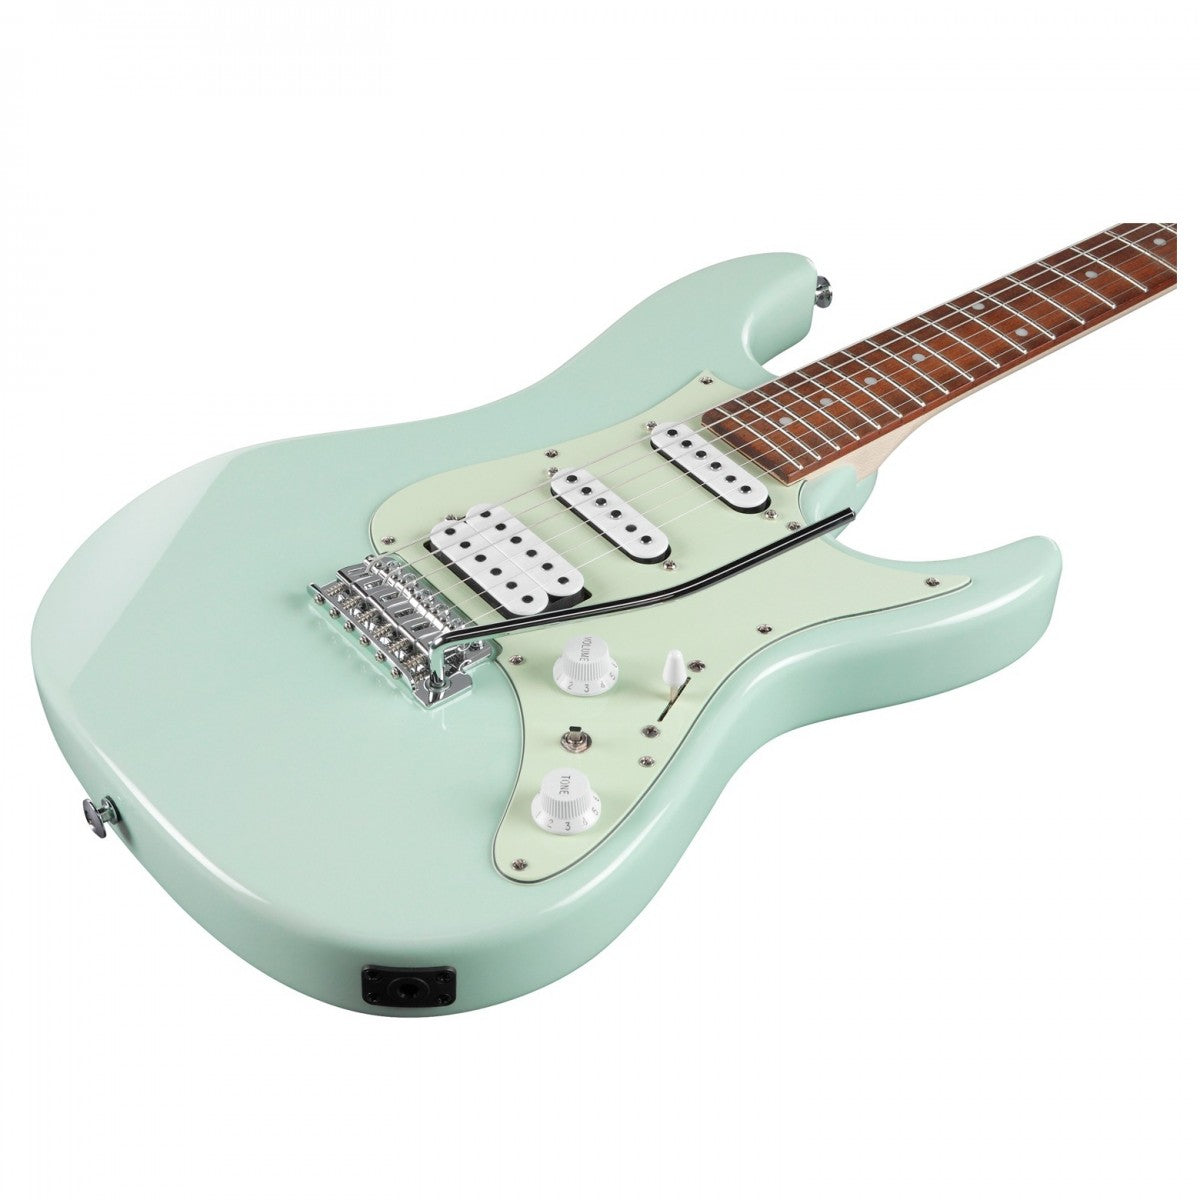 Ibanez AZES40 Electric Guitar - Mint Green, IBANEZ, ELECTRIC GUITAR, ibanez-electric-guitar-azes40-mgr, ZOSO MUSIC SDN BHD